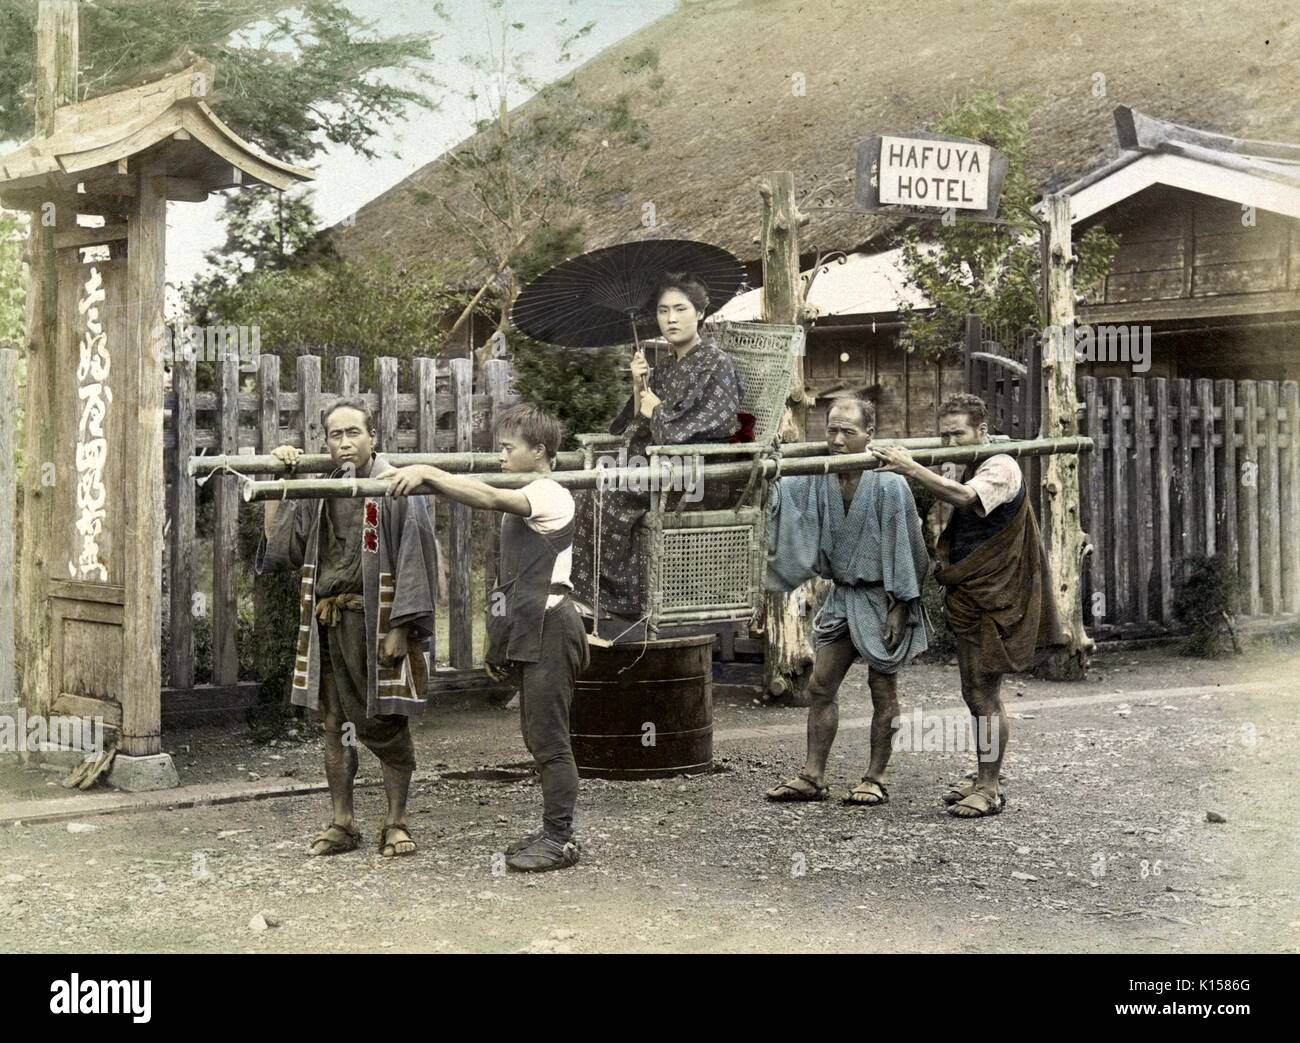 A woman in a fine kimono, holding an umbrella, is being transported in a kago that consists of a chair suspended from two long sections of bamboo, four men are carrying her along a rocky road, the background consists of a fence, hill side, and a building with a sign that reads Hafuya Hotel, Hakone, Japan, 1894. From the New York Public Library. Stock Photo